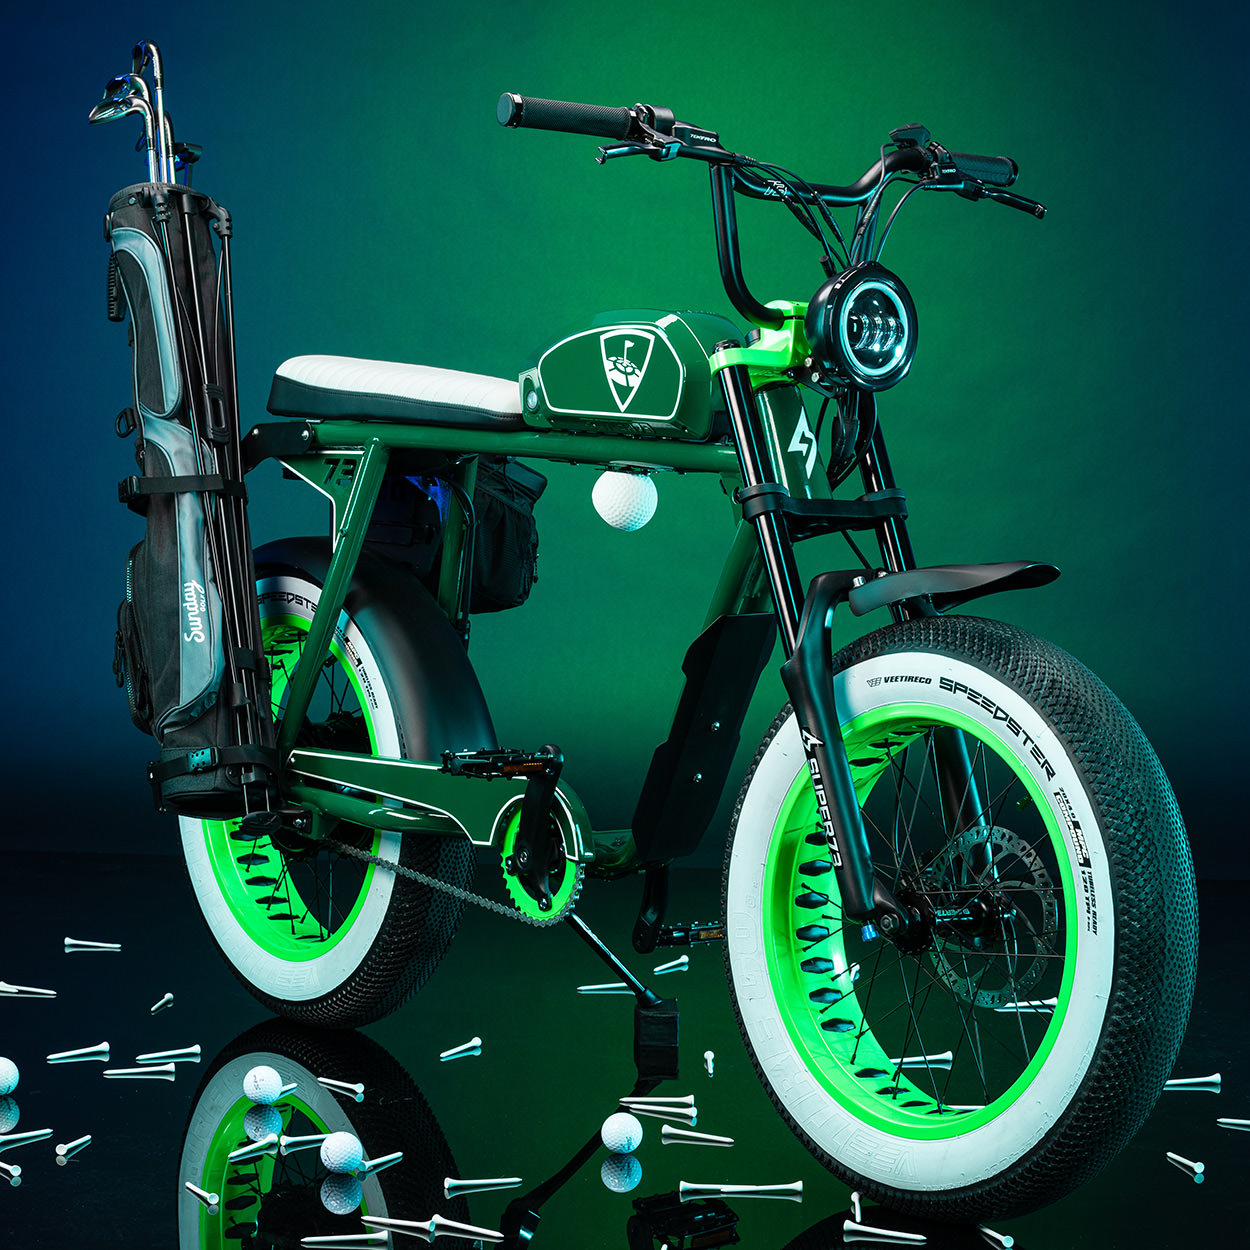 Topgolf Super73 S2 electric motorcycle